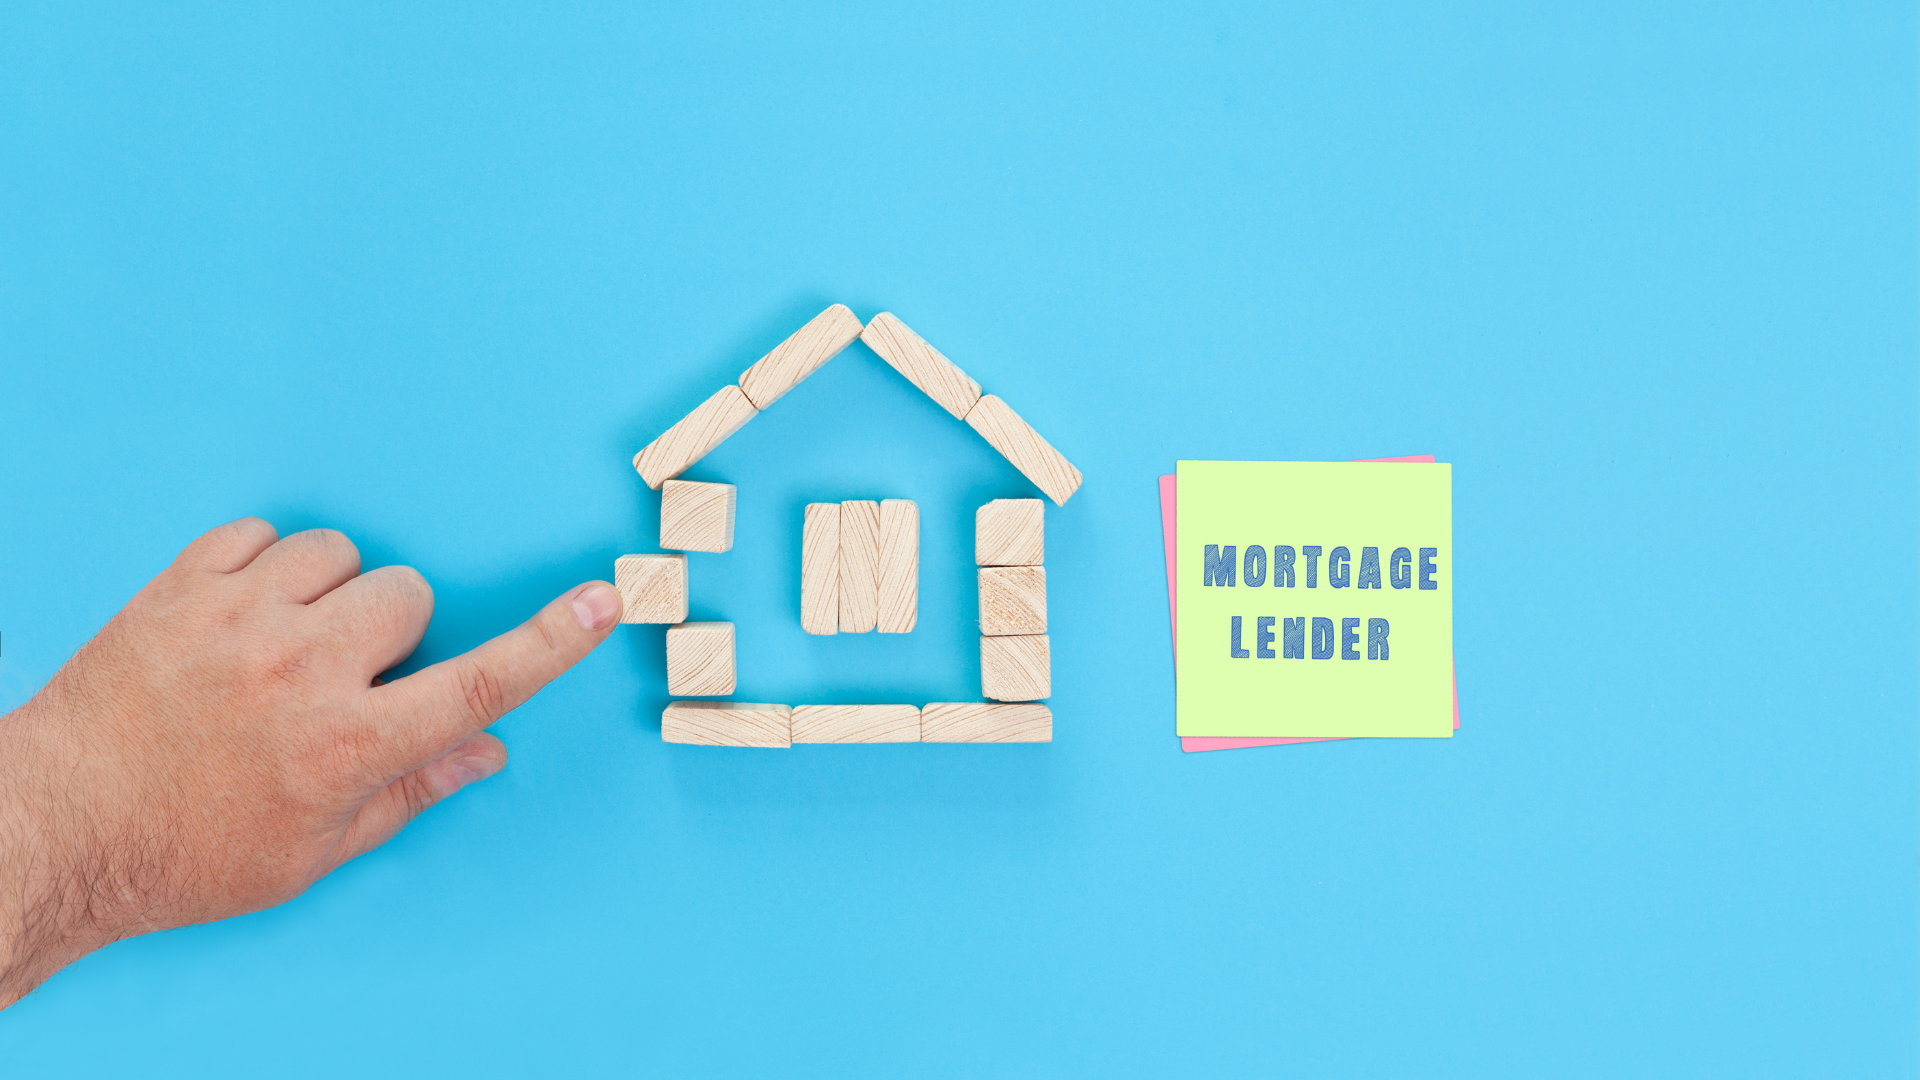 Understanding The Role of LMI In Property Investment - A Man Showing A House Built With Small Wooden Blocks and A Sticky Note Where its Written Mortgage Lender